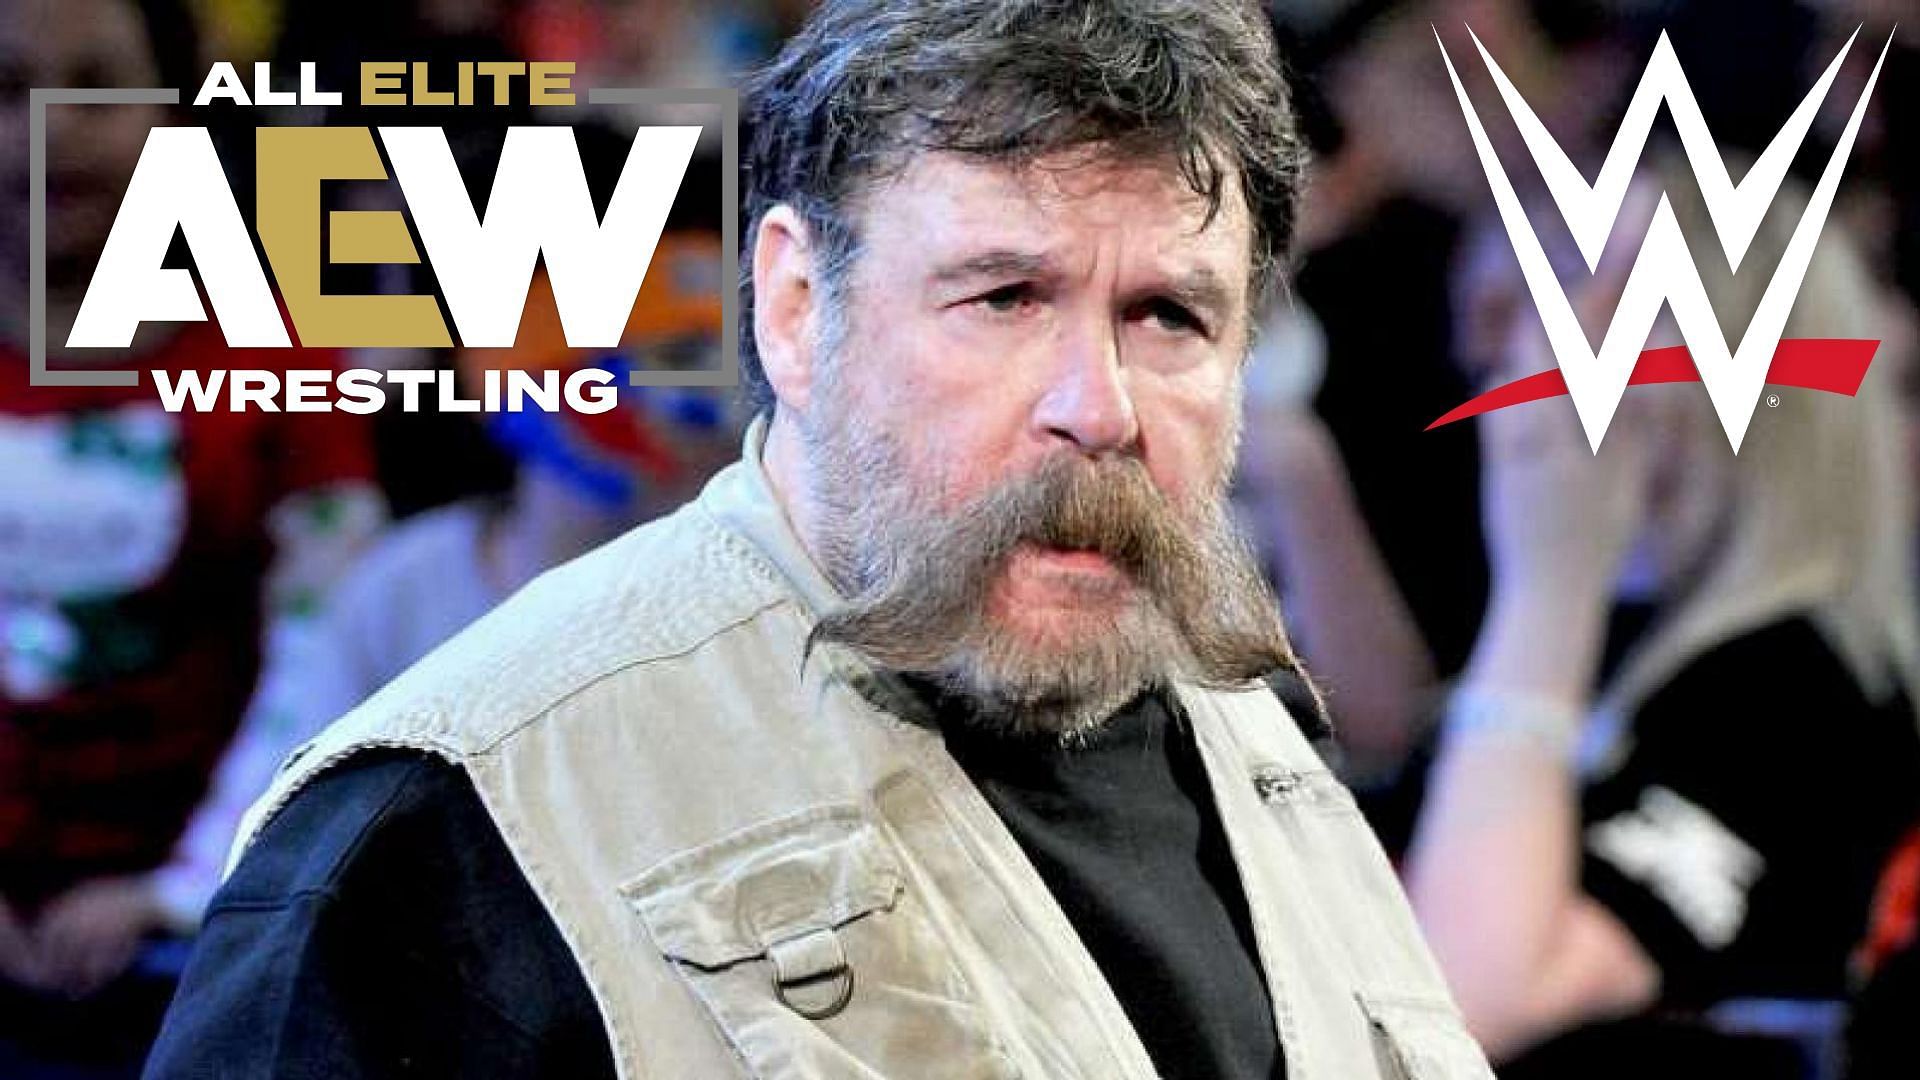 Dutch Mantell has weighed in with his thoughts on botches in AEW and WWE